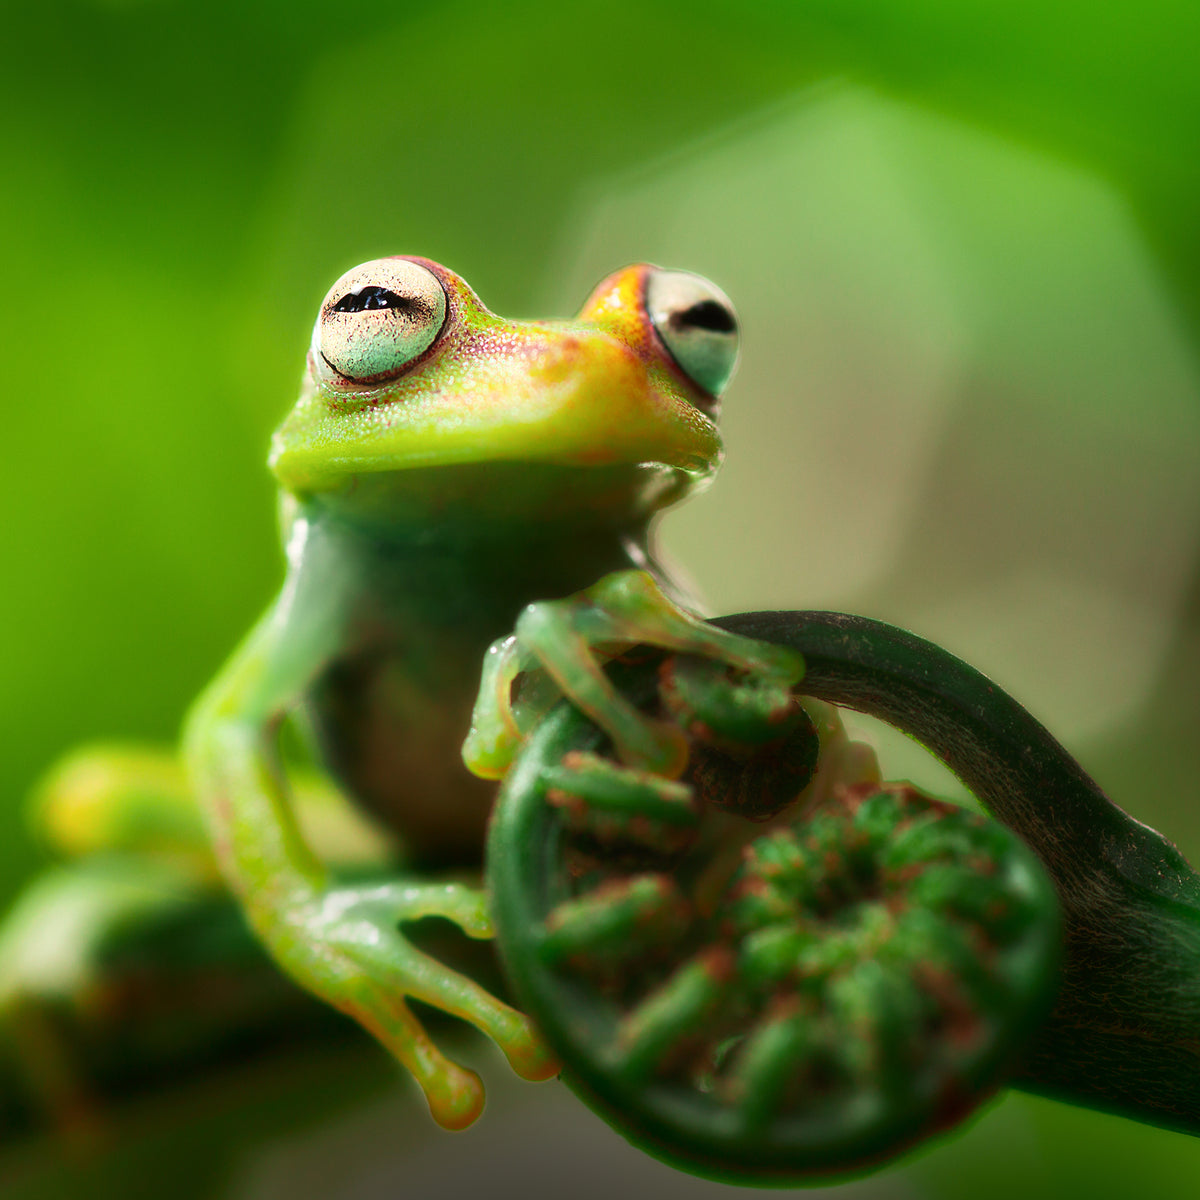 Image of green frog